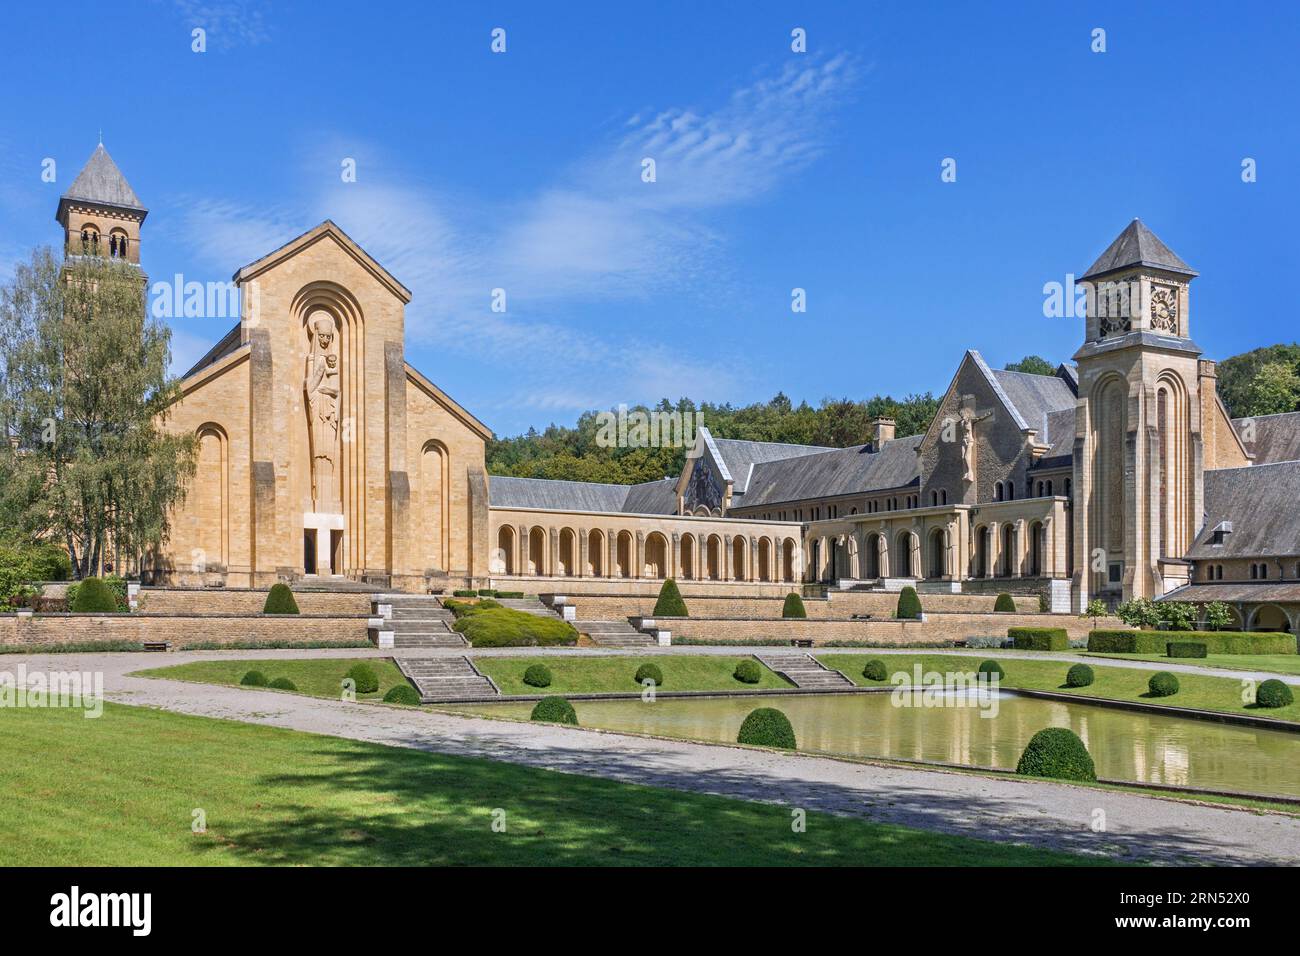 Orval Abbey / Abbaye Notre-Dame d'Orval, courtyard of the new Cistercian monastery at Villers-devant-Orval, Florenville, Luxembourg, Wallonia, Belgium Stock Photo